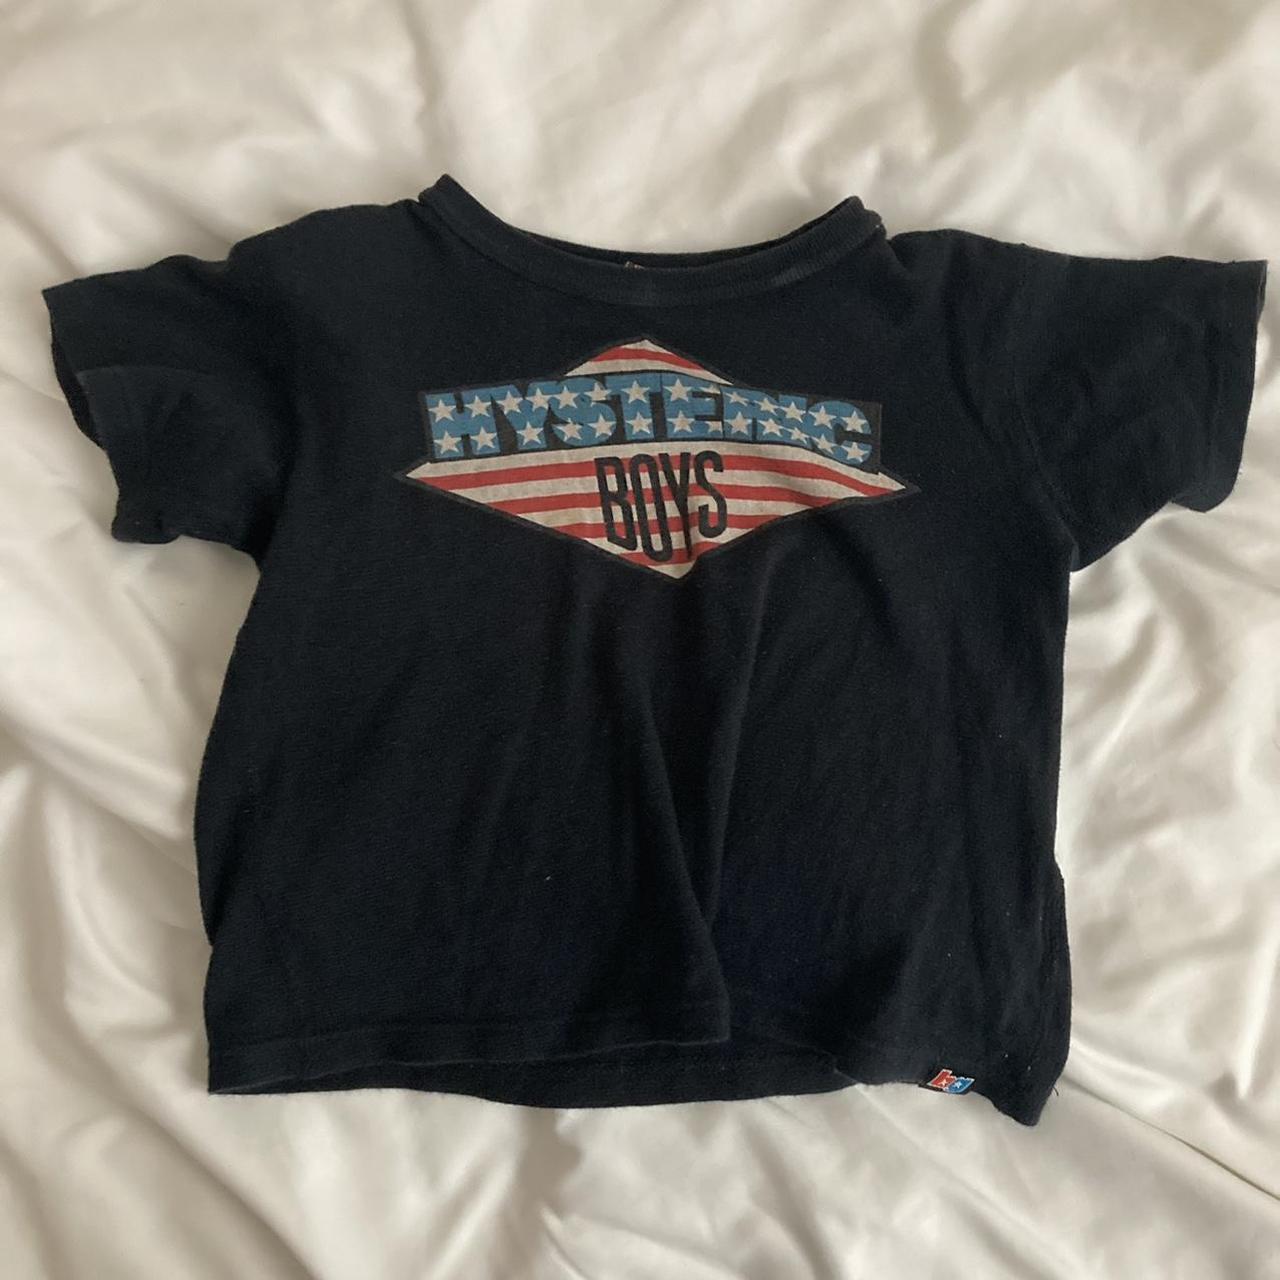 Product Image 1 - youth sized hysteric glamour graphic